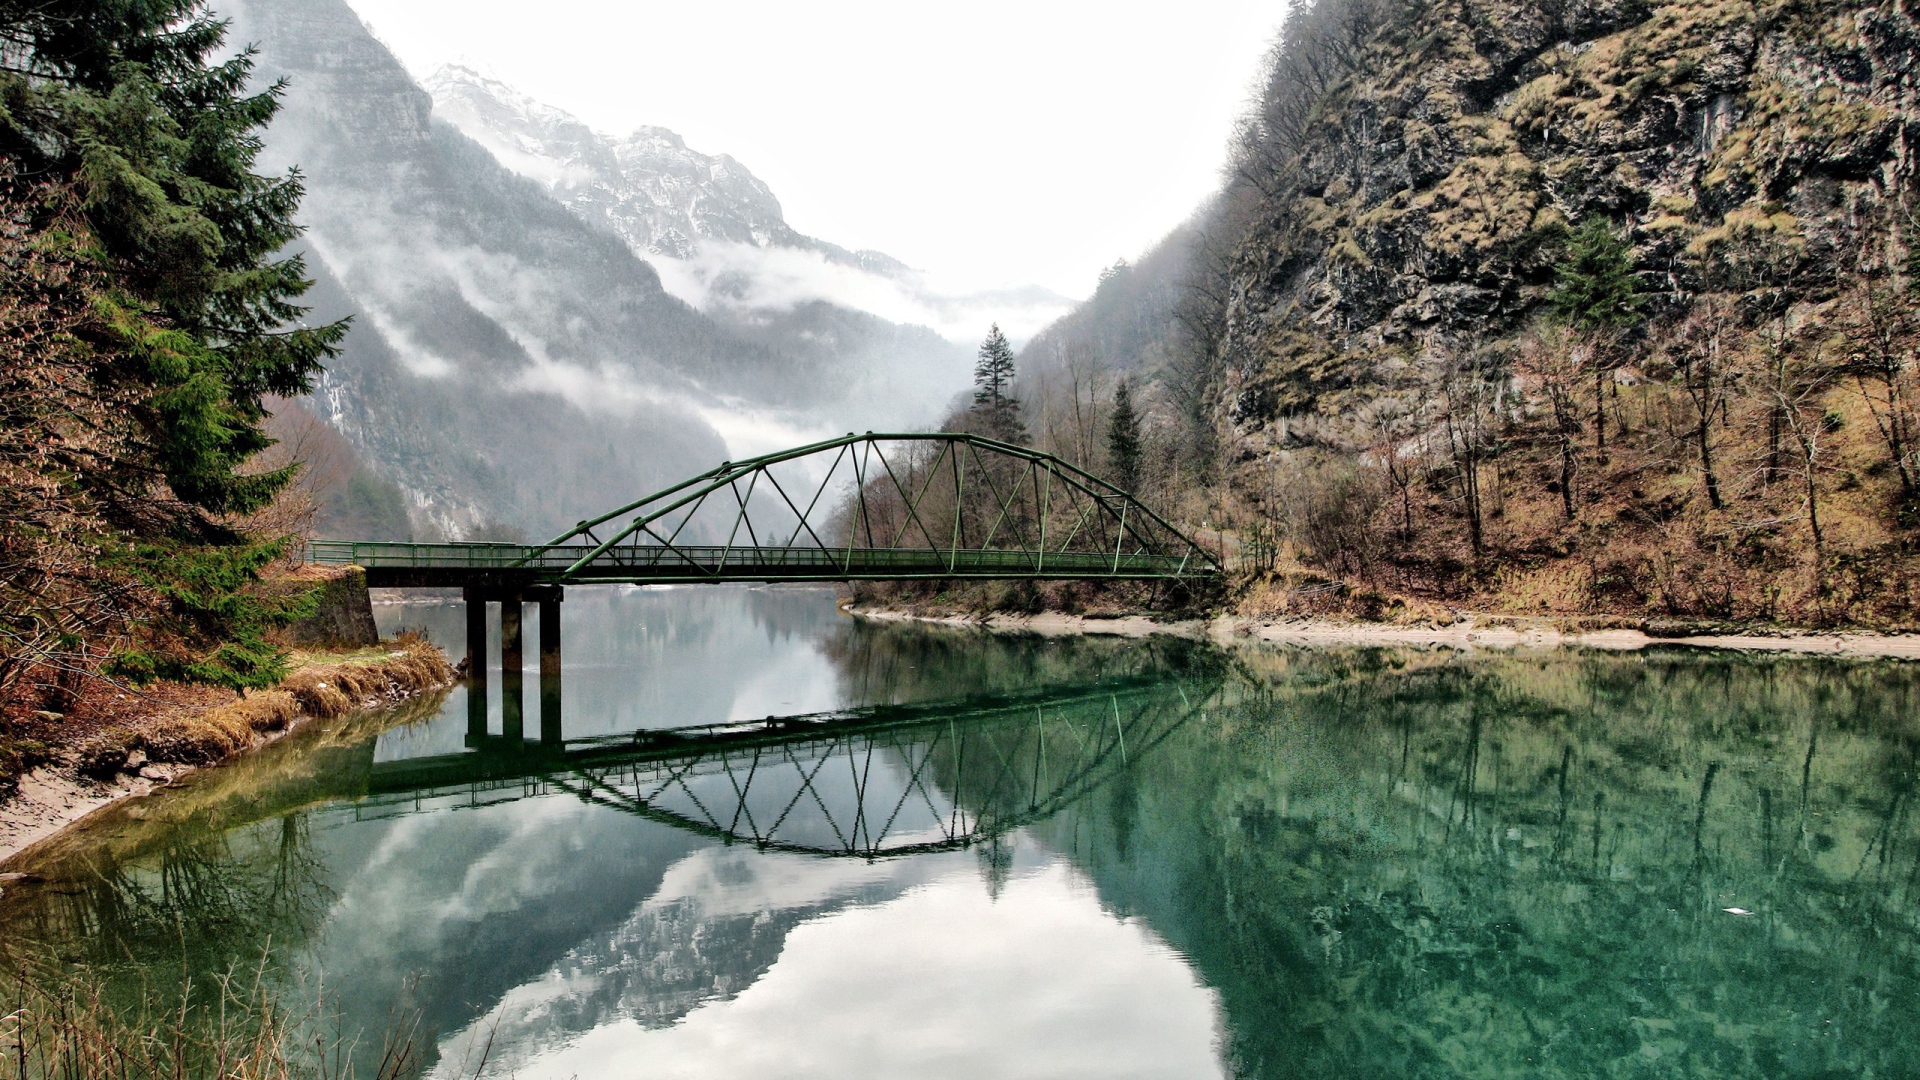 The bridge on the river in the mountains, France